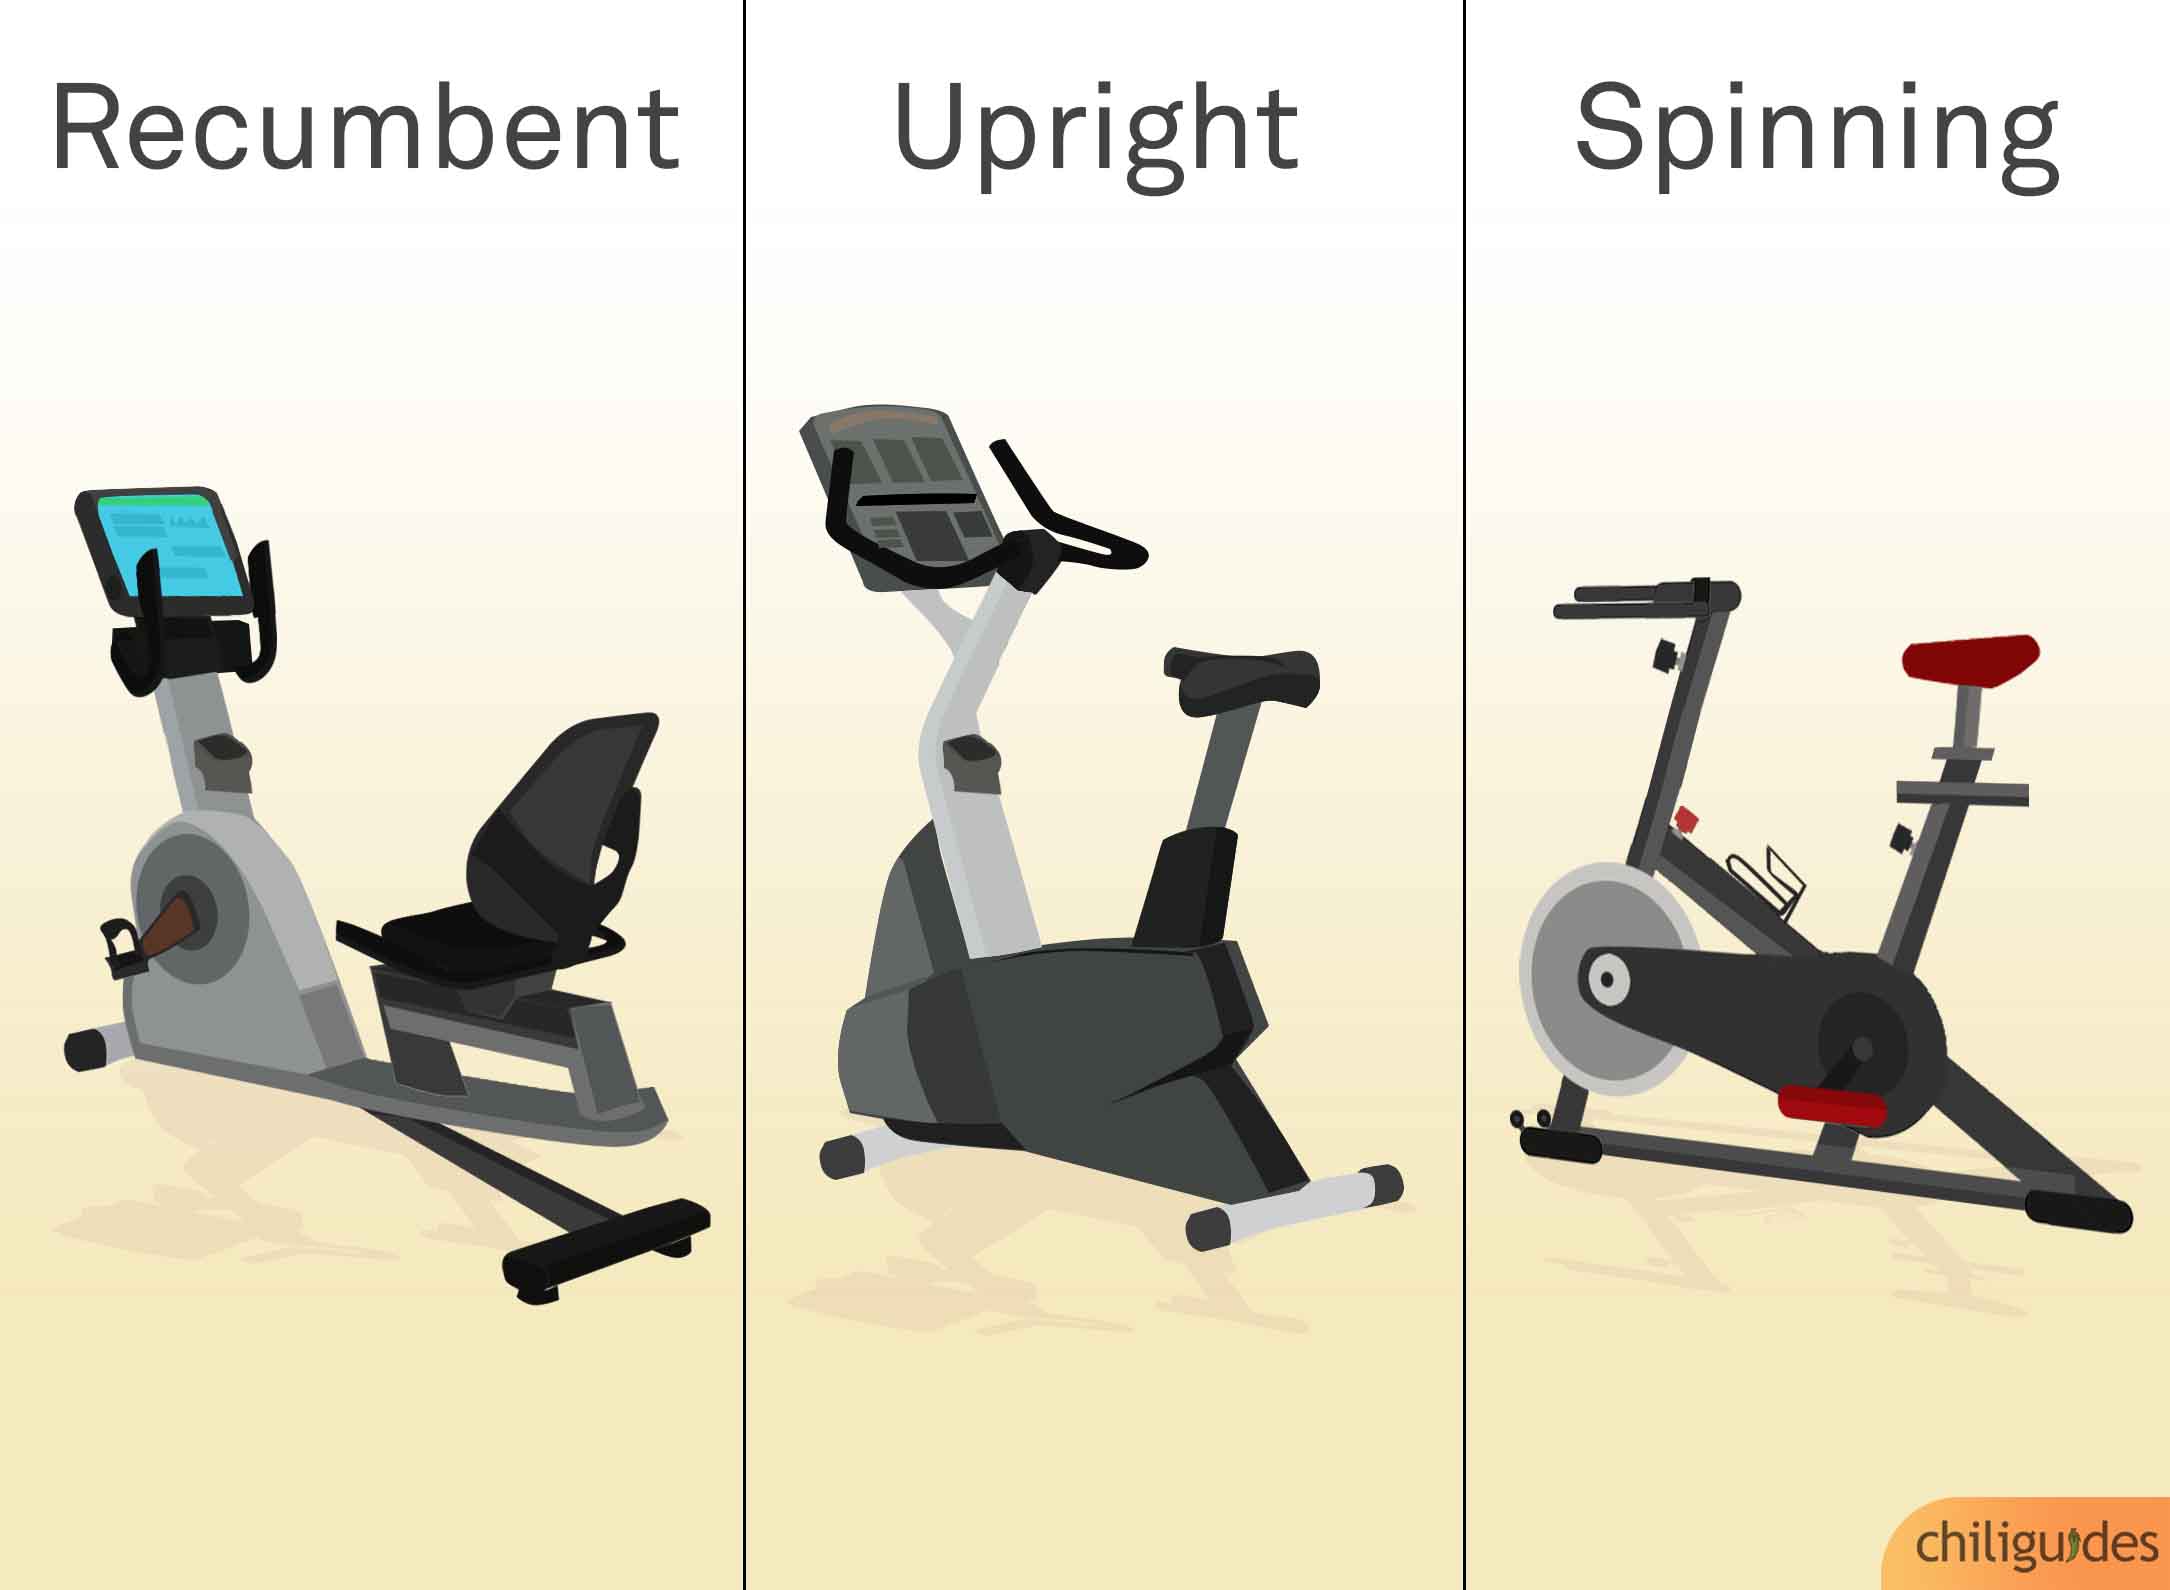 14 Best Exercise Cycle In India - Unbiased Reviews - Top gym cycles for a home in India! 2